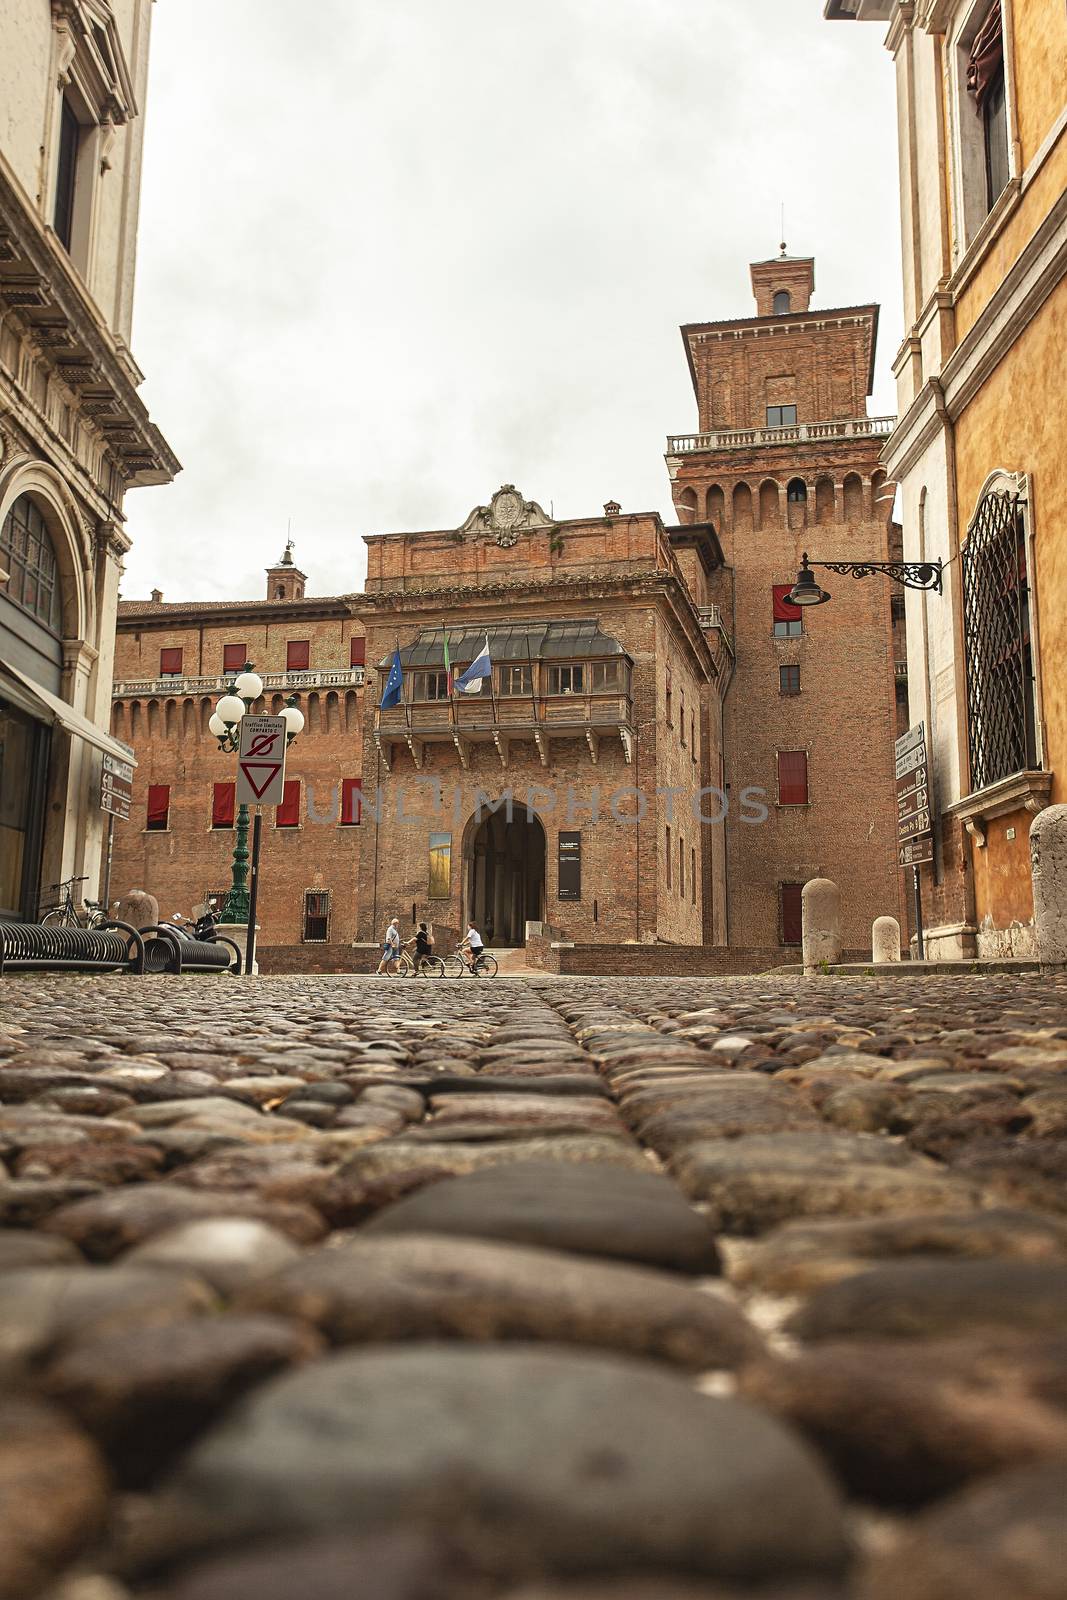 FERRARA, ITALY 29 JULY 2020 : View of the castle of Ferrara from the street in front of it